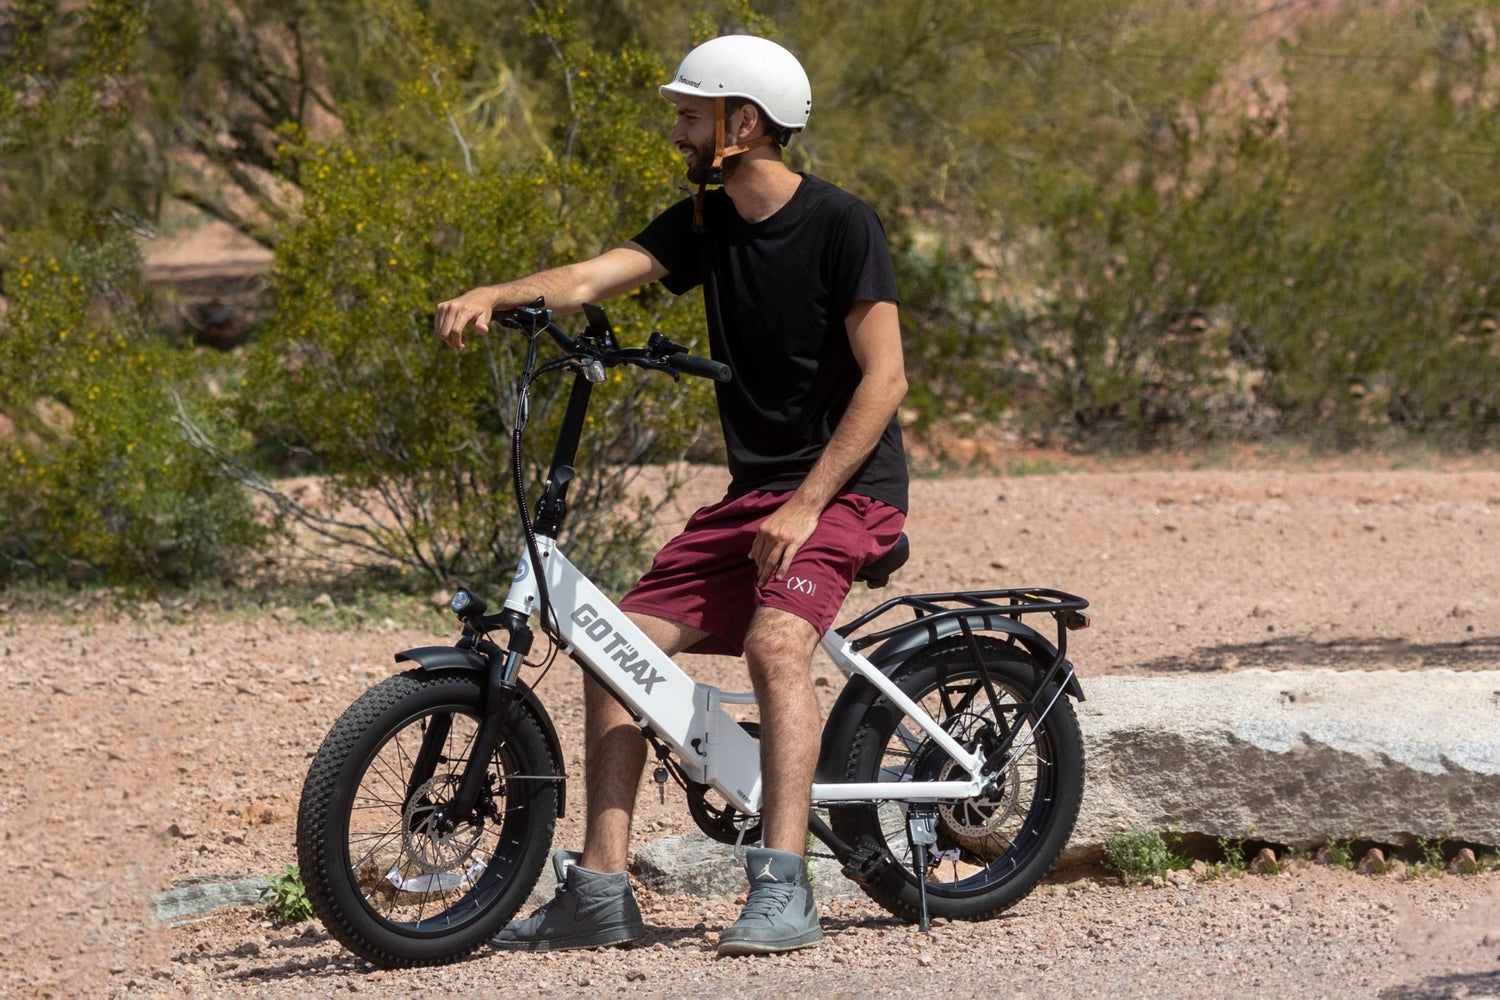 Product Overview: The F2 Electric Bike - GOTRAX